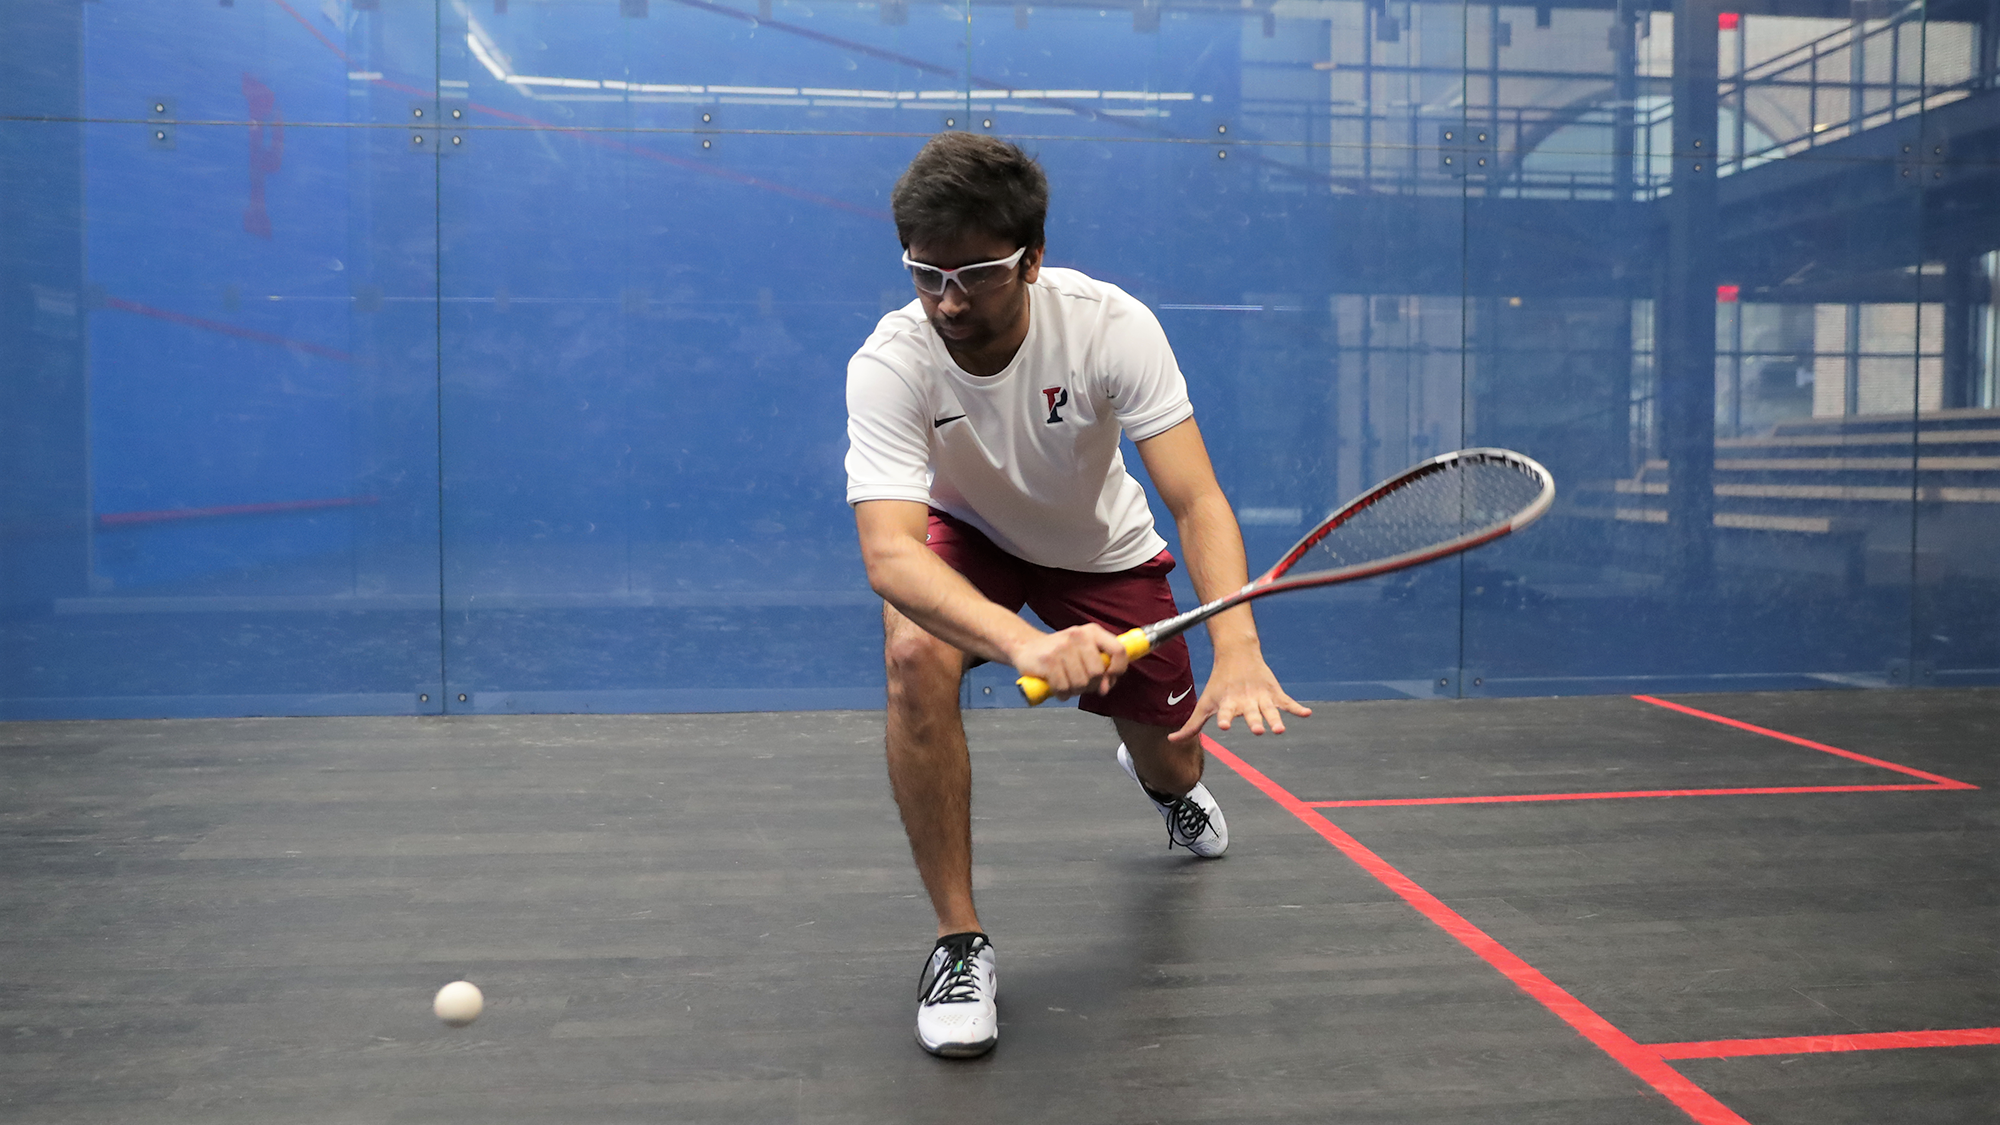 Against Rochester on Saturday in New York, graduate student Yash Bhargava became the first player in the history of the program to win 50 matches.